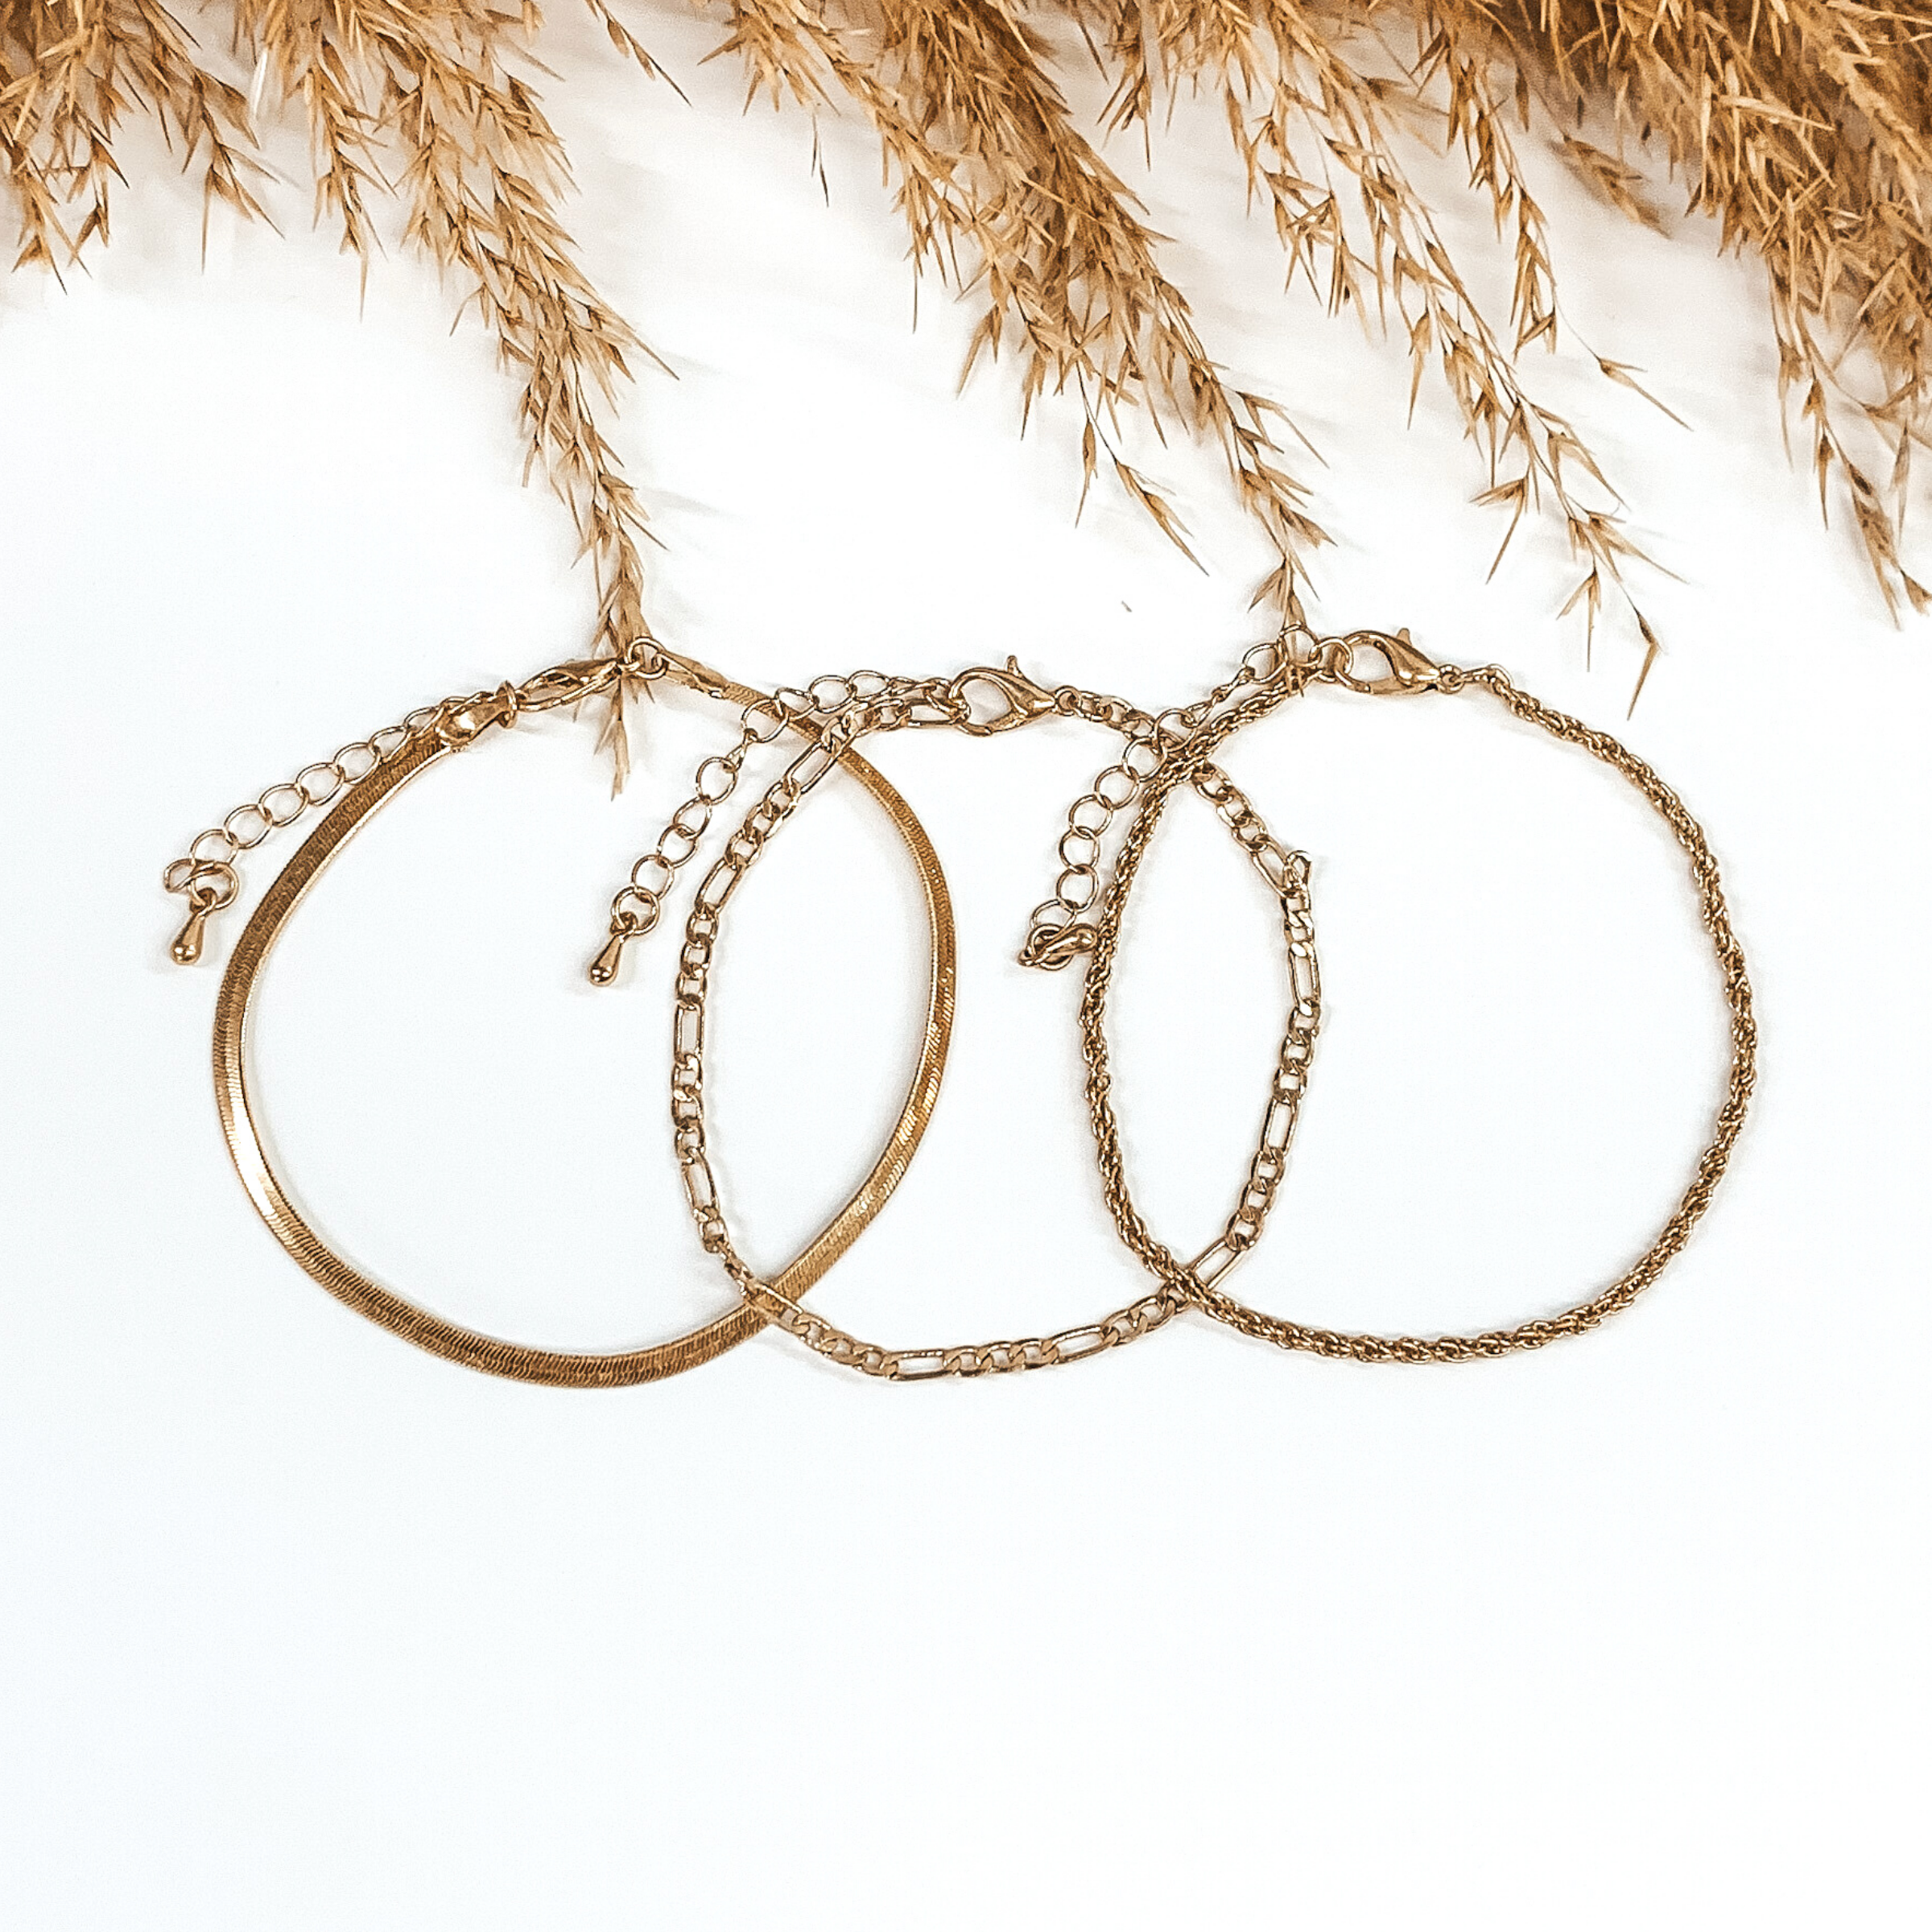 Three gold chained bracelets that are laying on top of each other. There is a snake chain, figaro chain, and a rope chain bracelet. These bracelets are pictured on a white background with tan floral at the top of the picture.